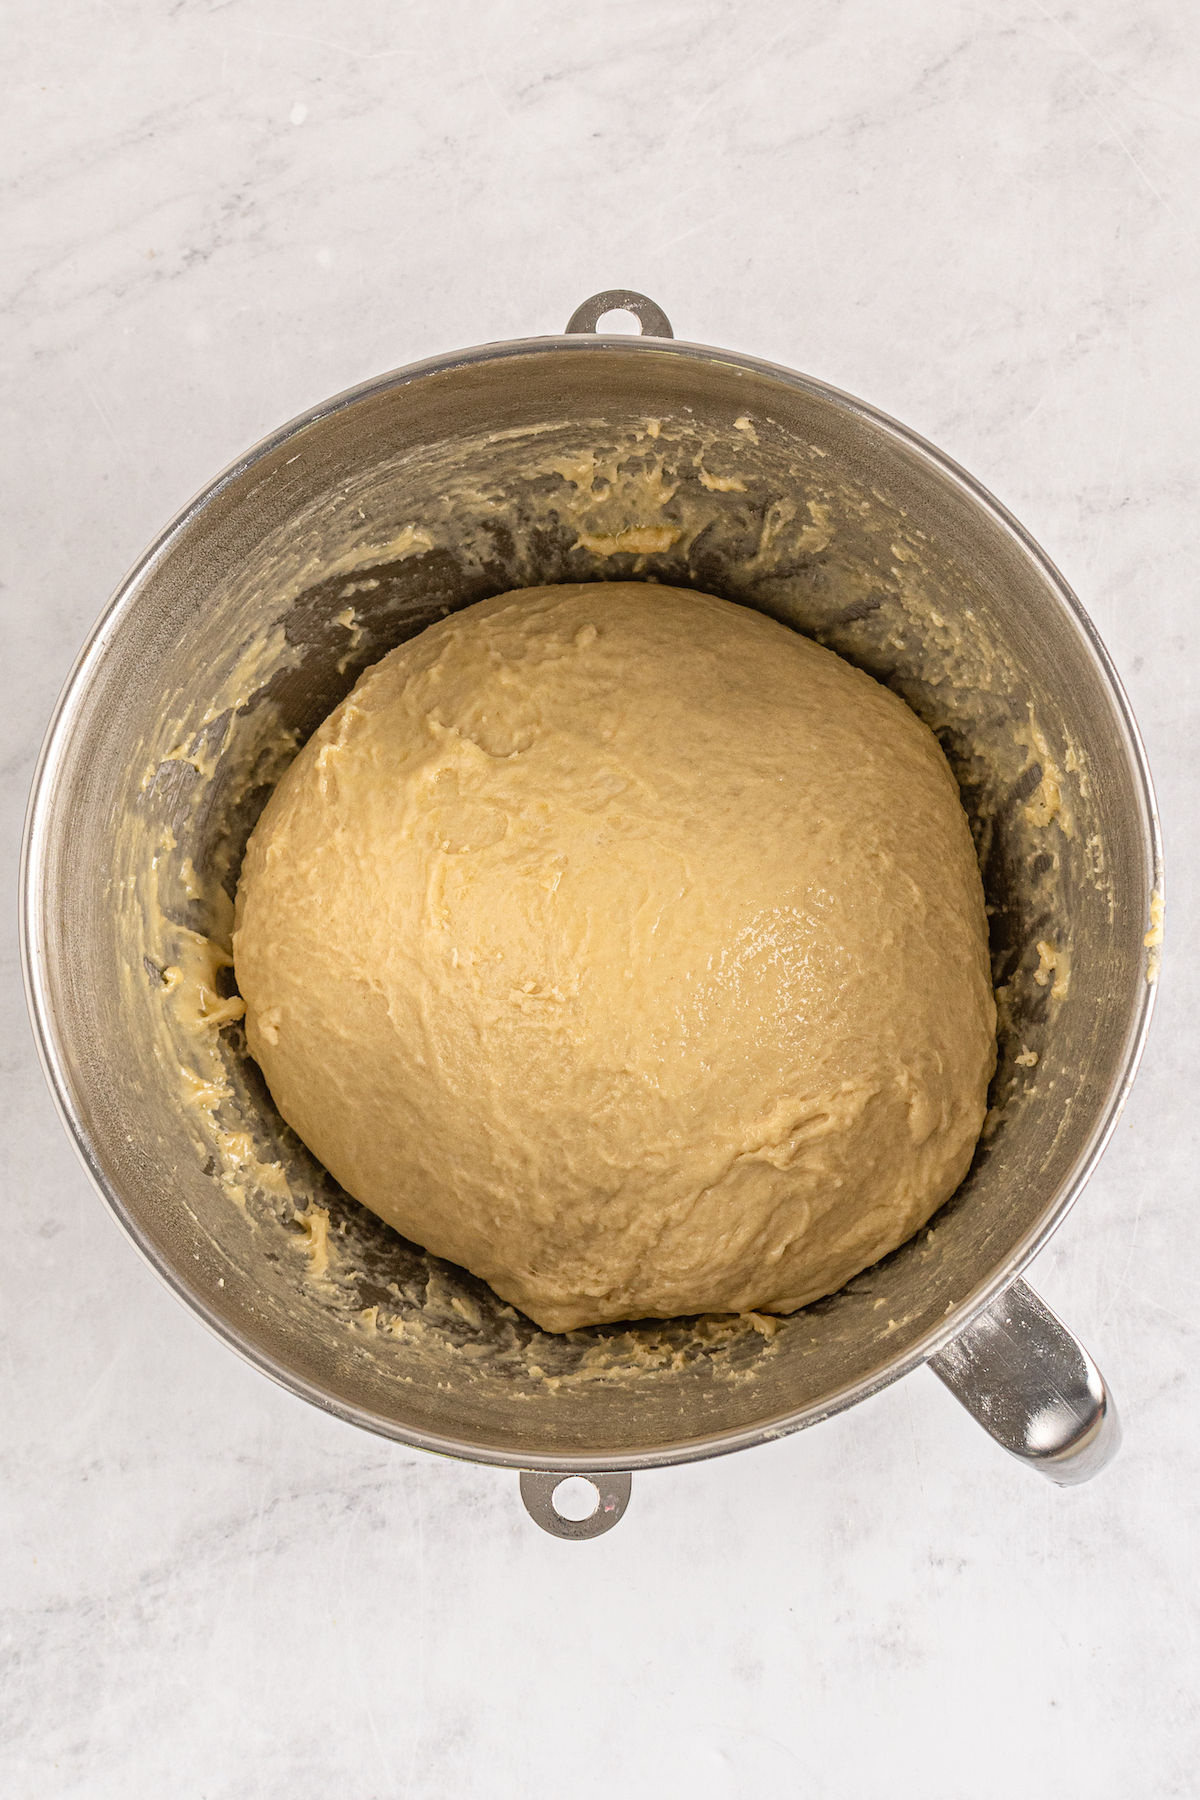 Yeast roll dough in a mixing bowl.